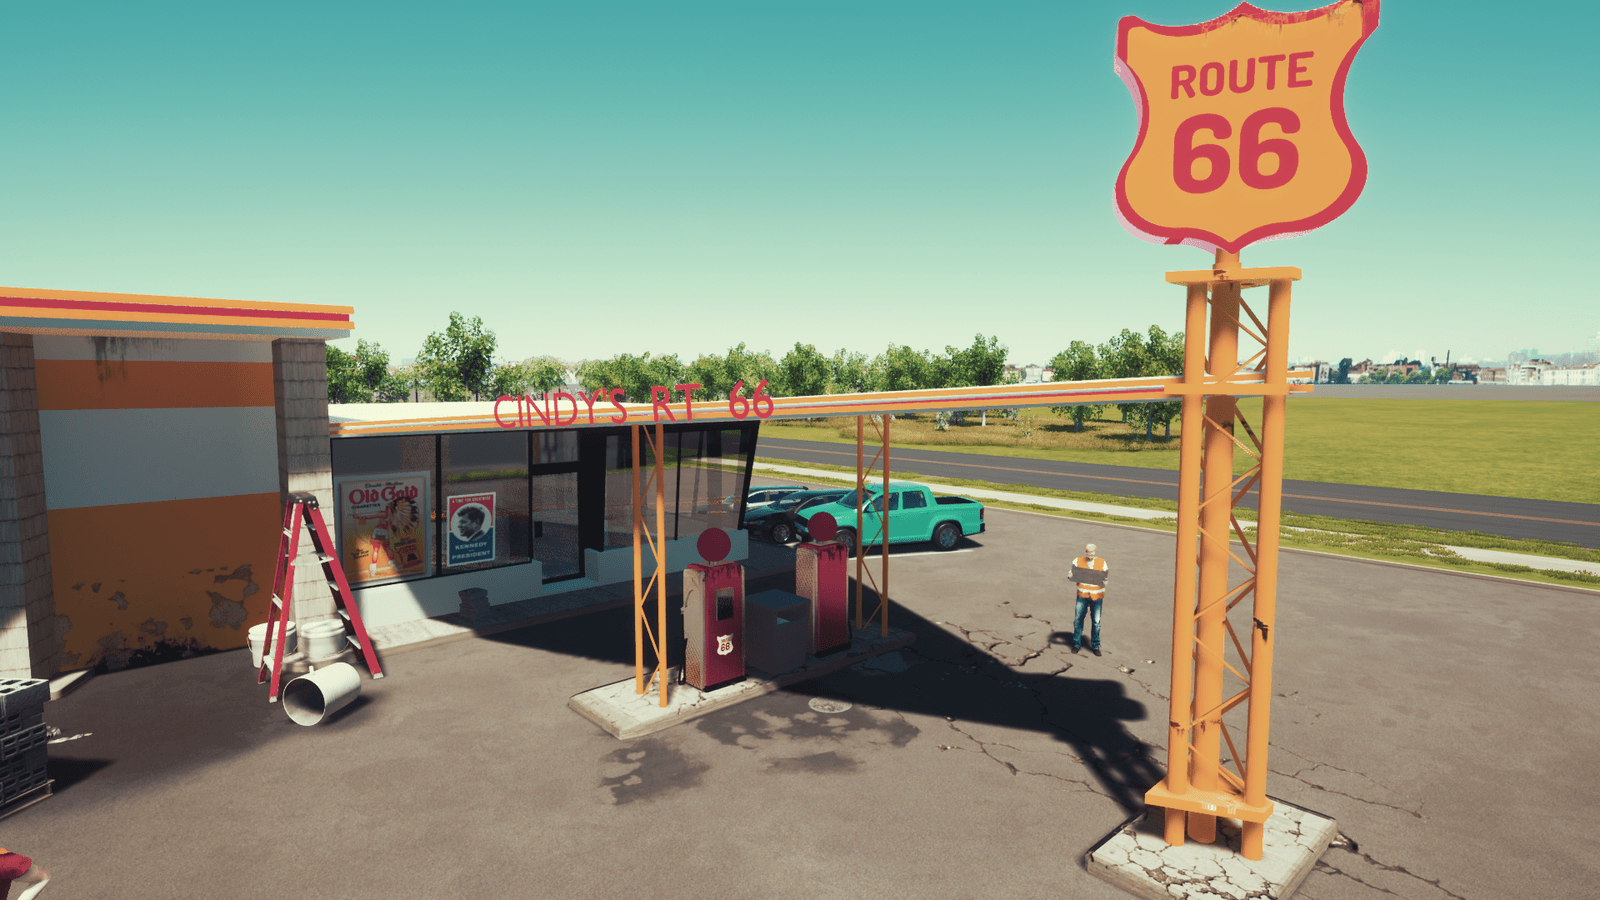 “Gas Station” by Ethan Tate